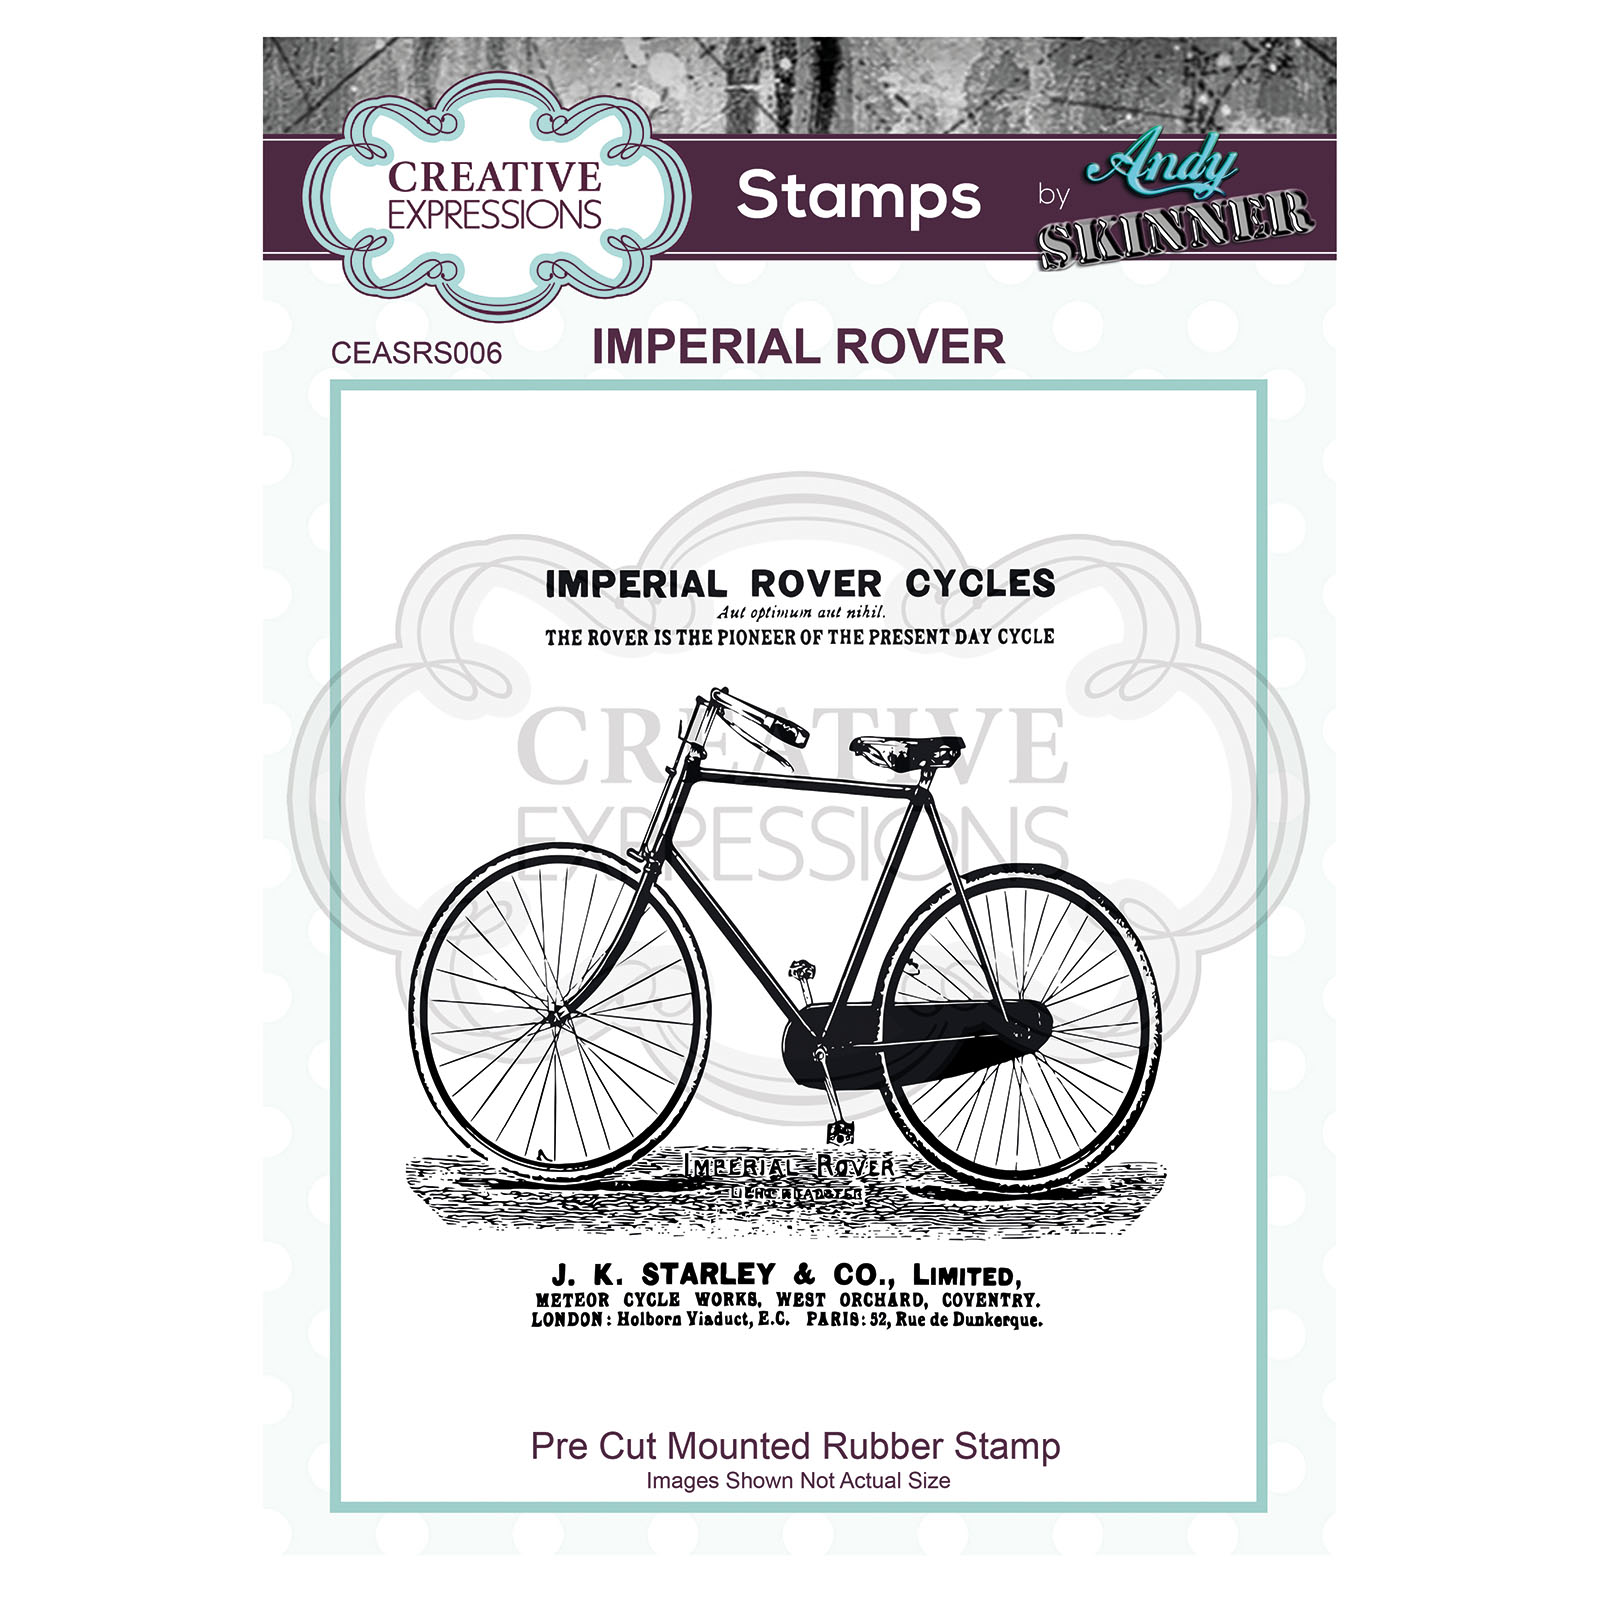 Creative Expressions • Pre Cut Rubber Stamp Andy Skinner Imperial Rover